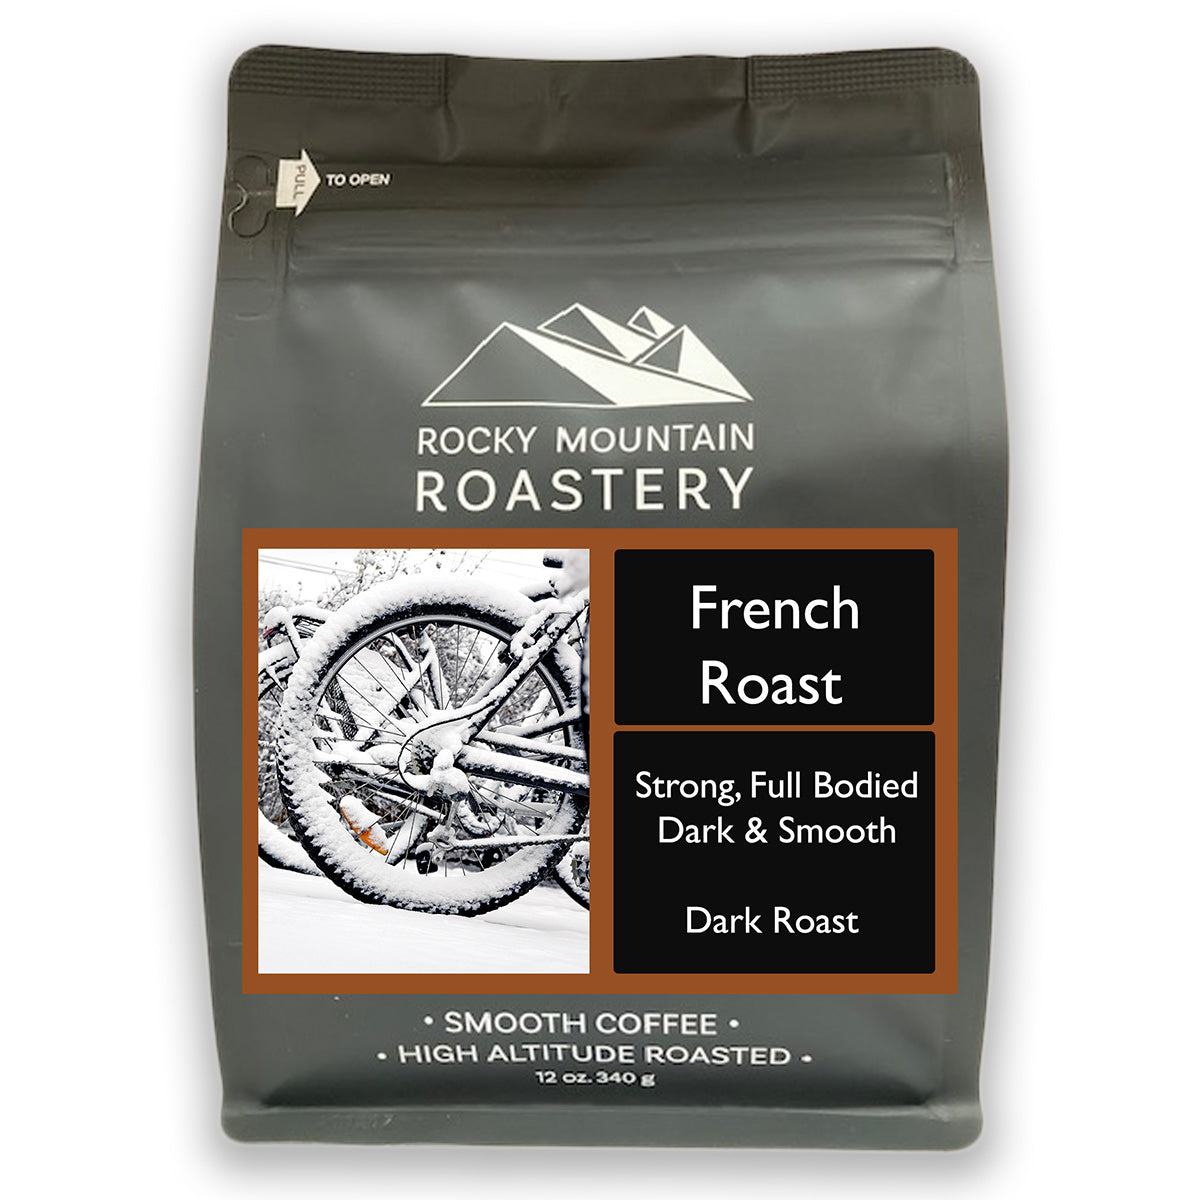 Picture of a bag of French Roast Coffee